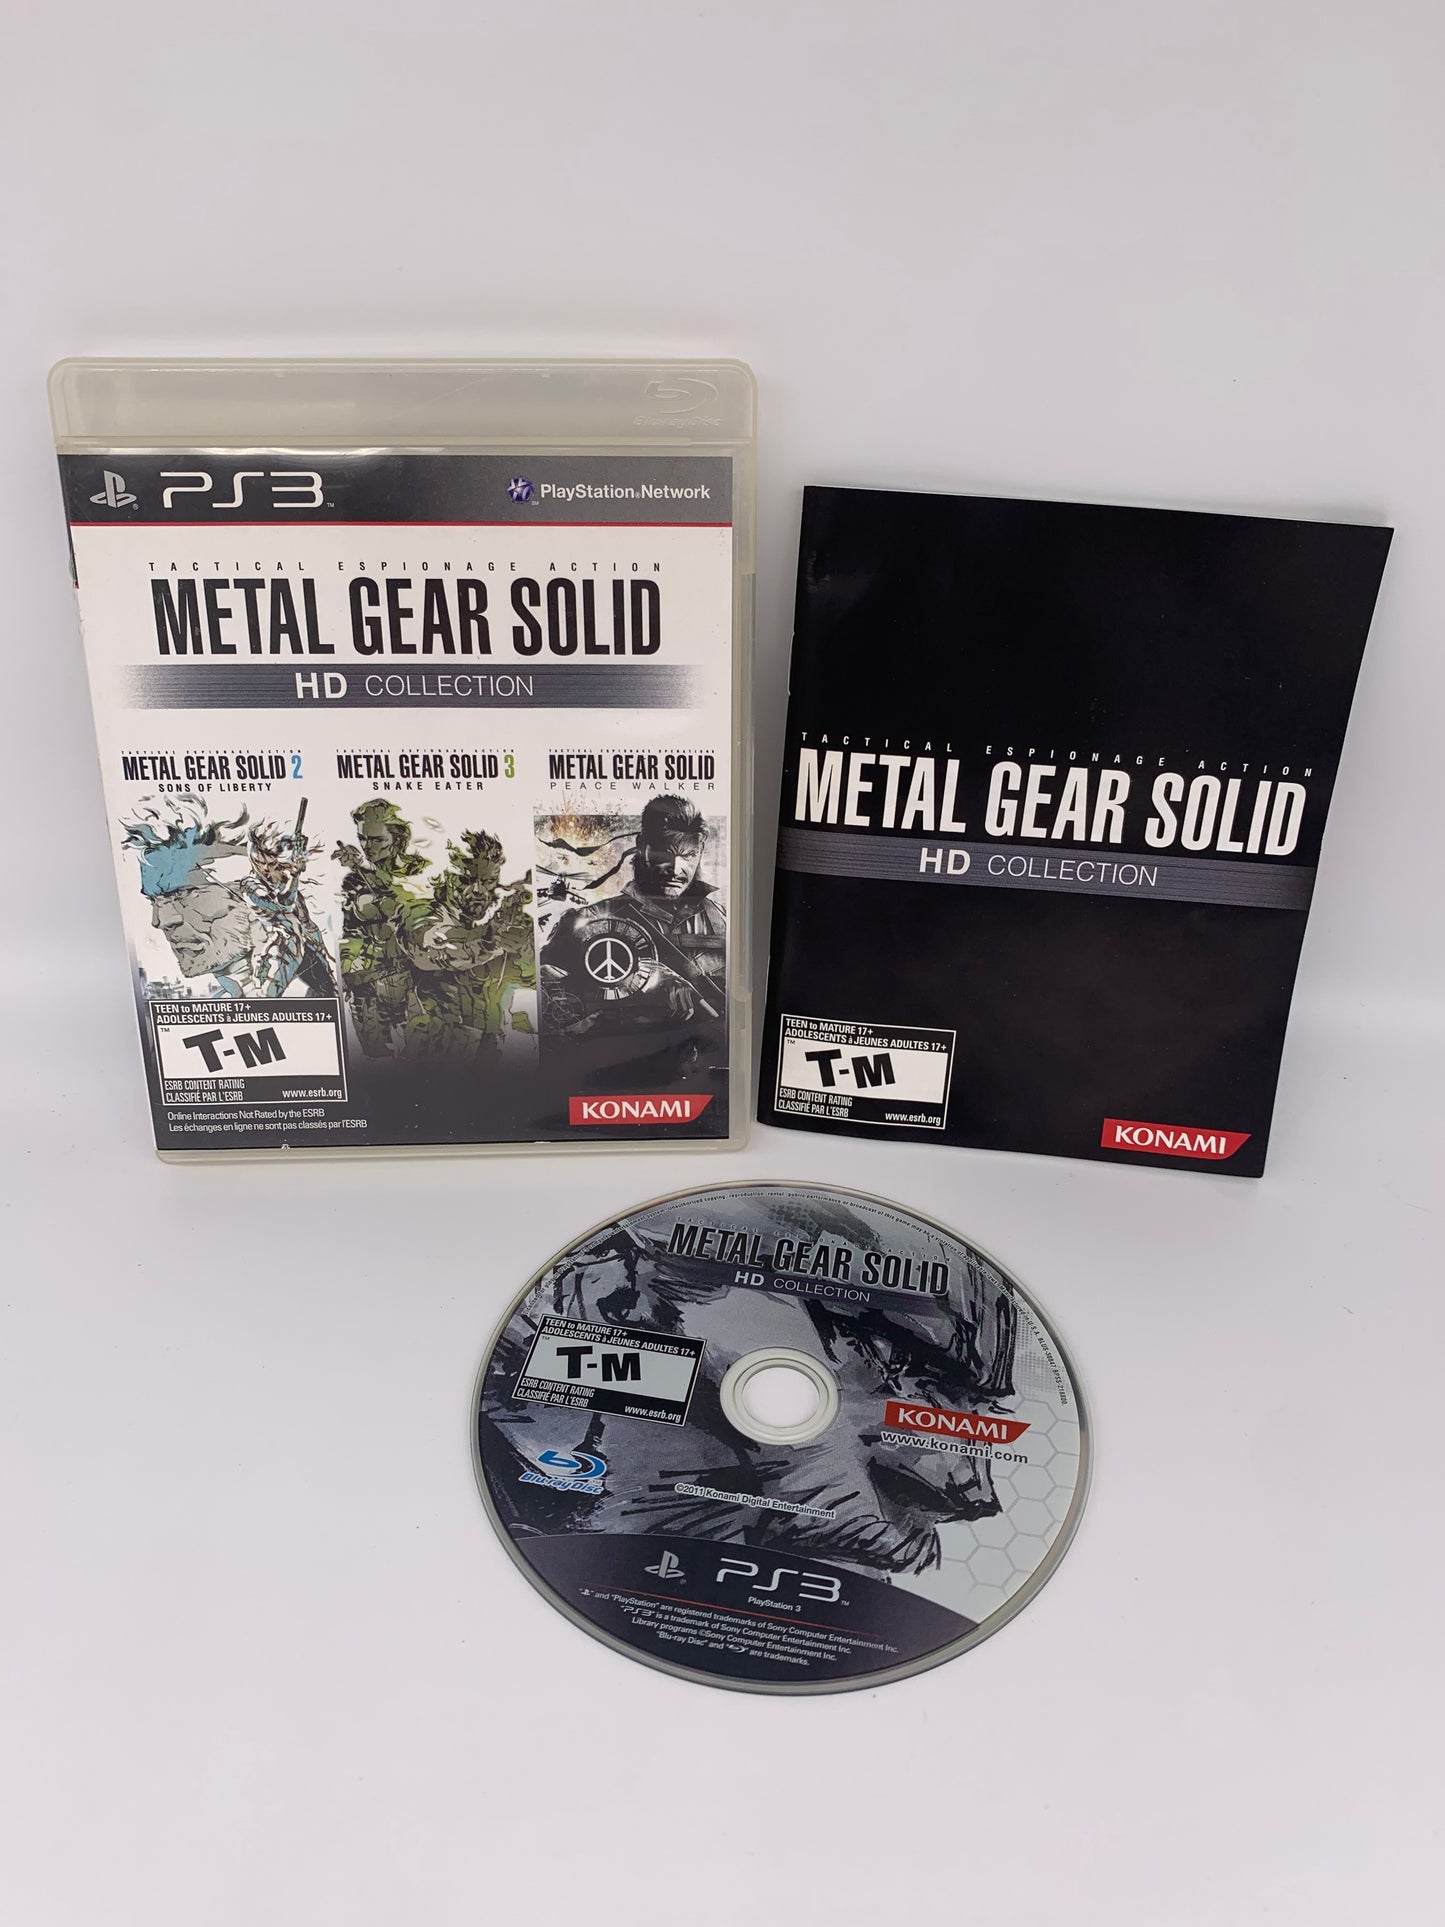 PiXEL-RETRO.COM : SONY PLAYSTATION 3 (PS3) COMPLET CIB BOX MANUAL GAME NTSC METAL GEAR SOLID HD COLLECTION